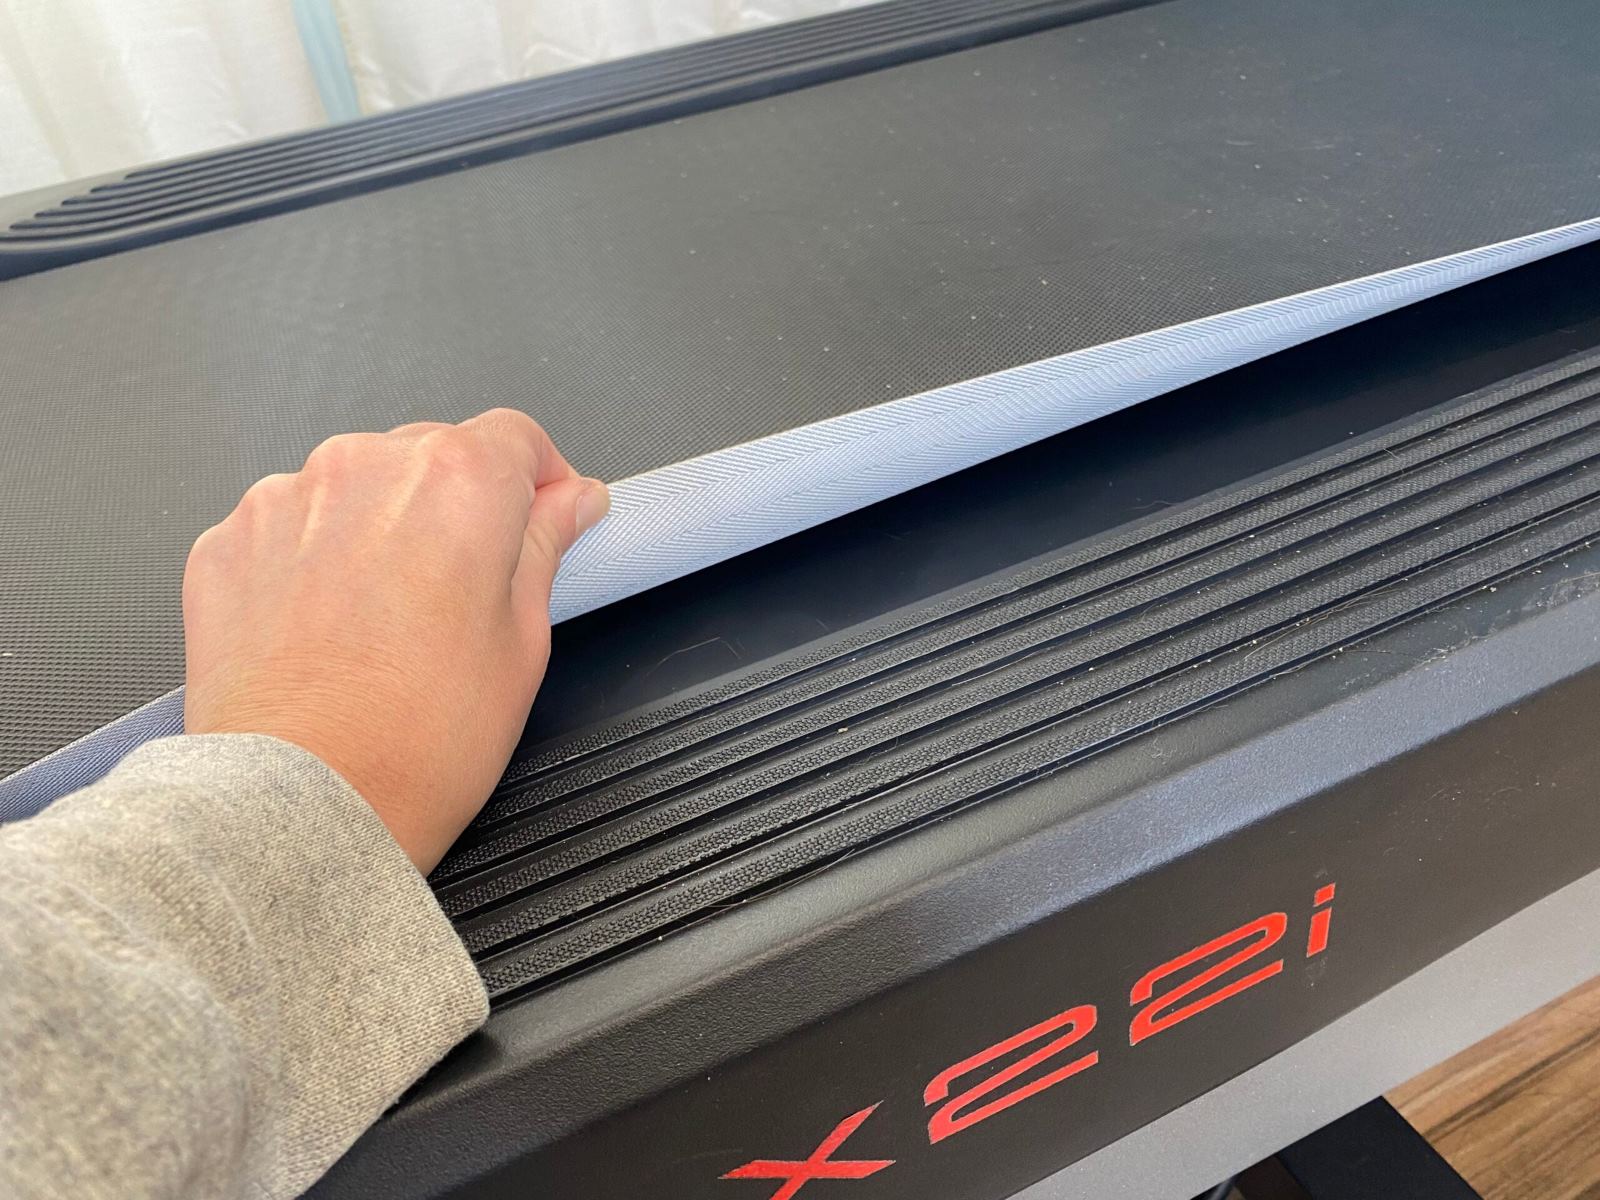 How To Tell If Treadmill Belt Is Tight